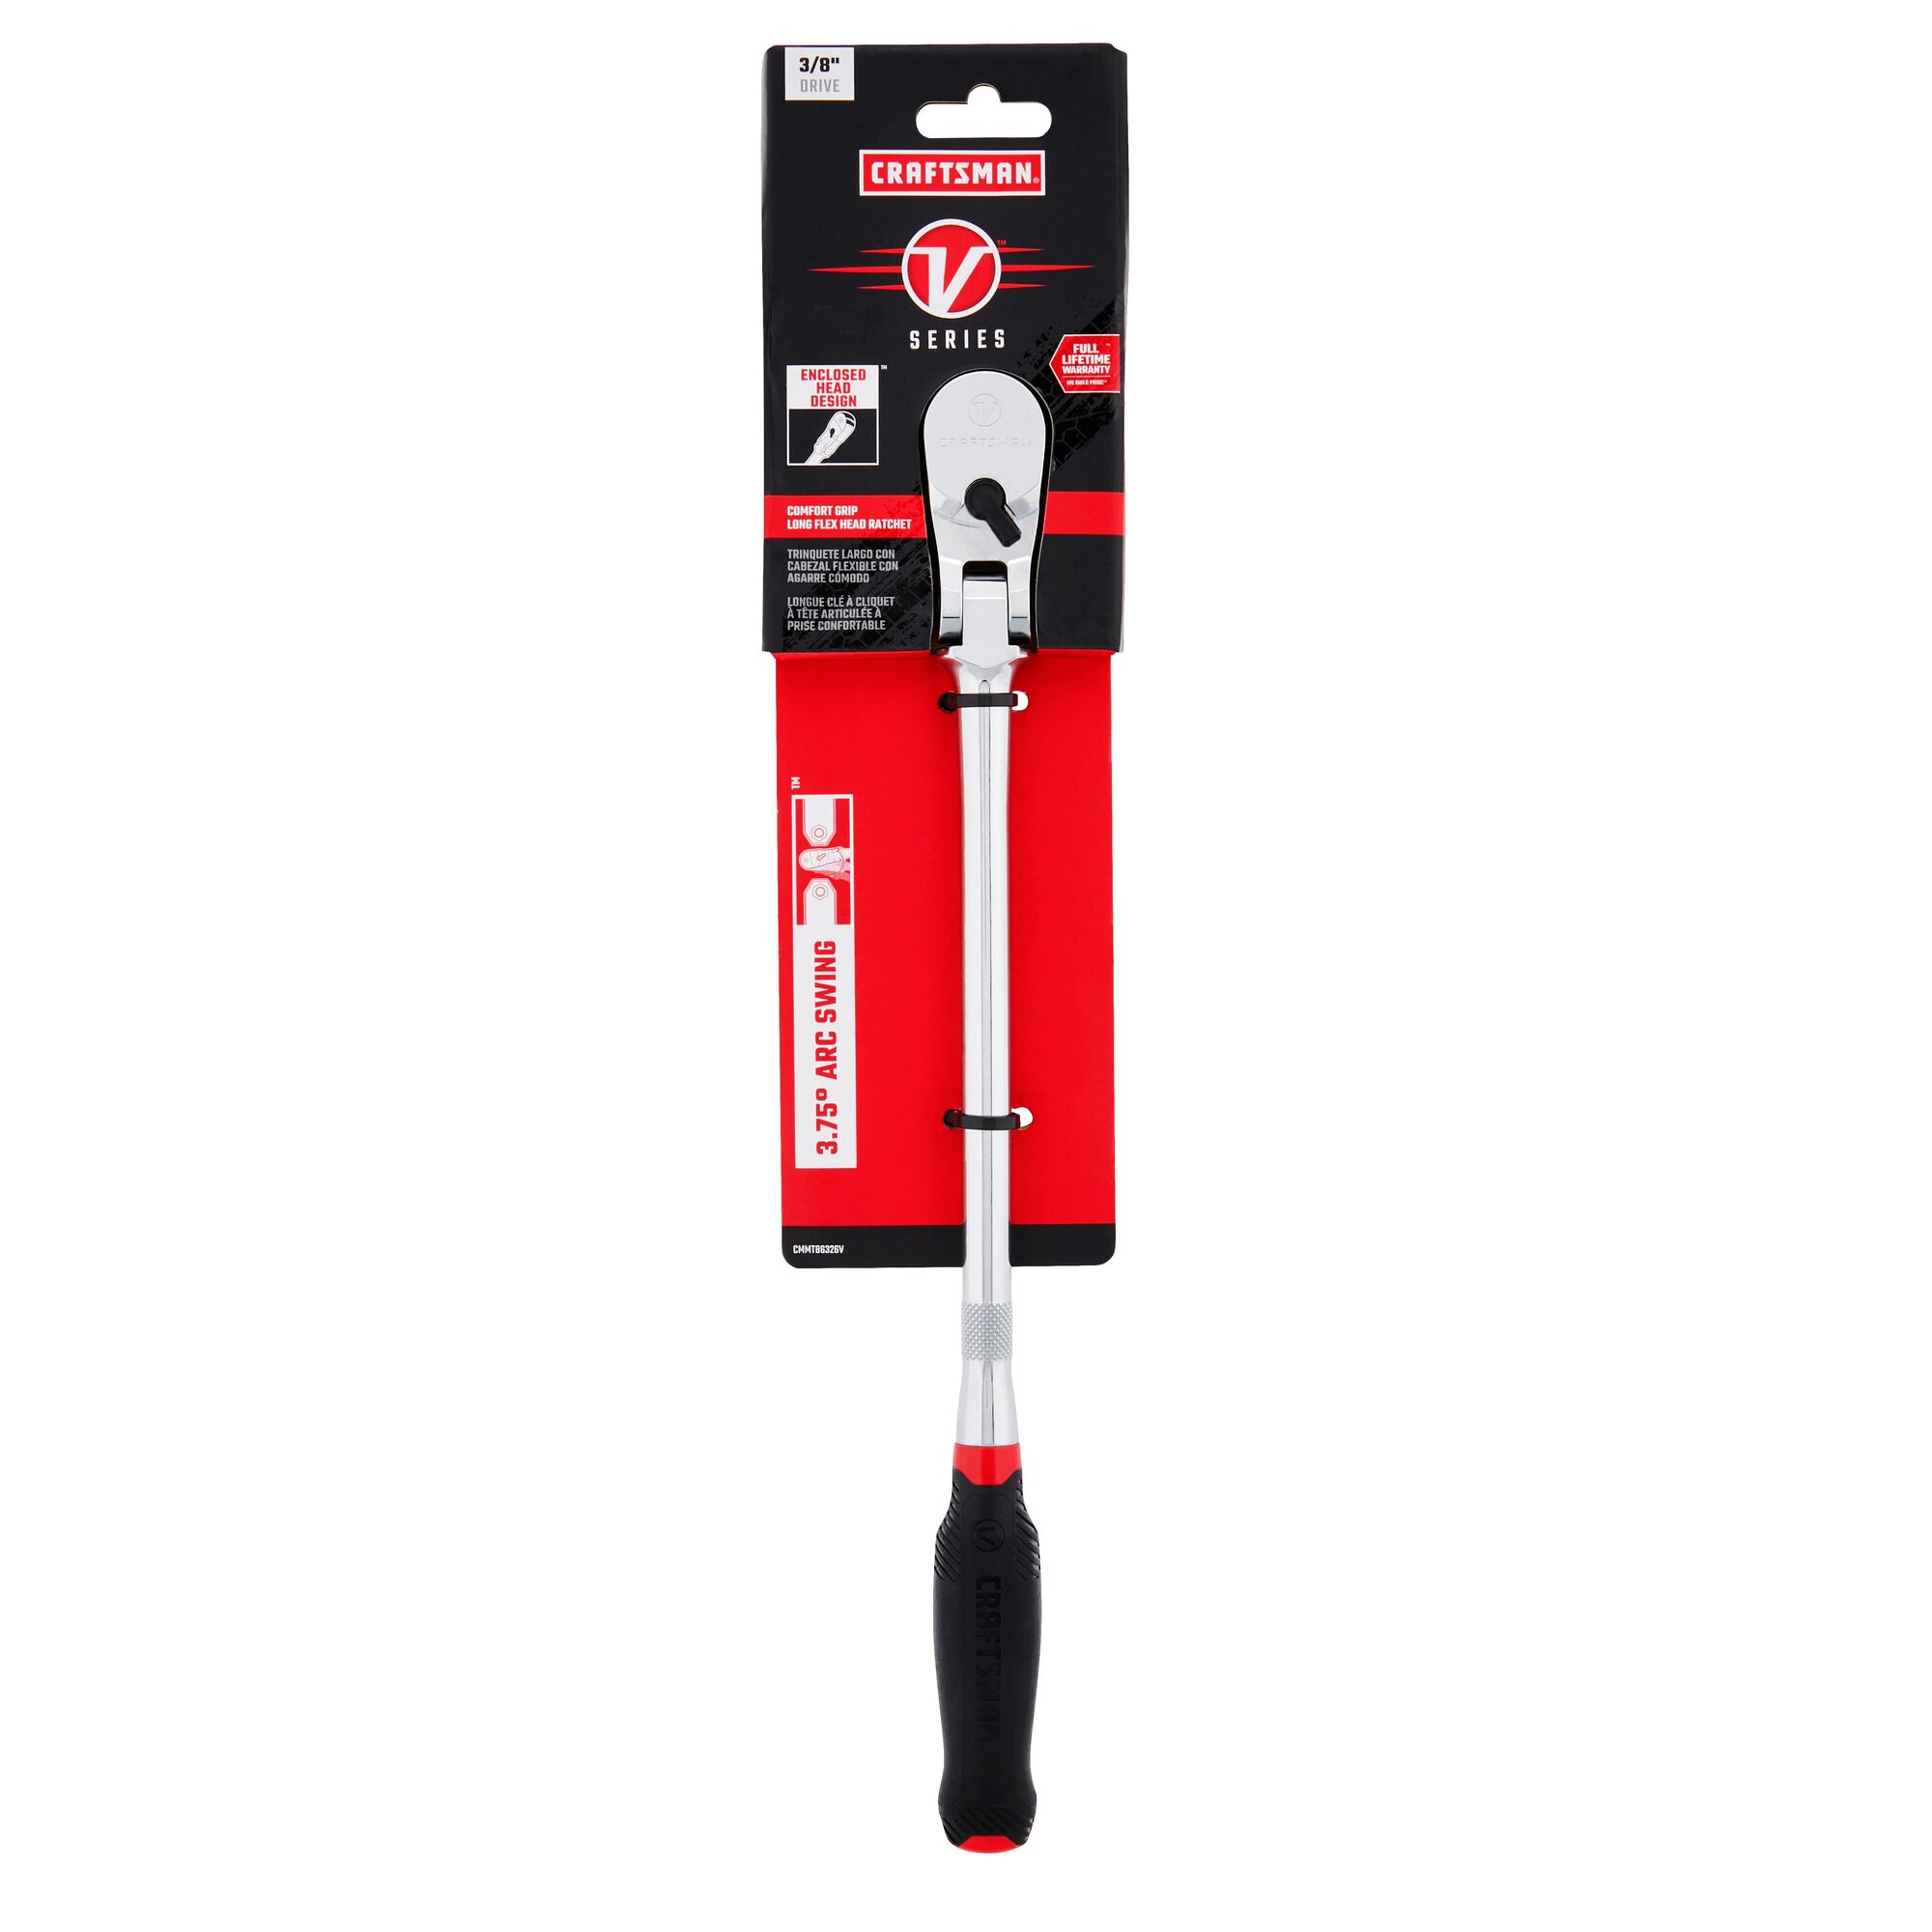 V series three eighth inch drive comfort grip long flex head ratchet in packaging.